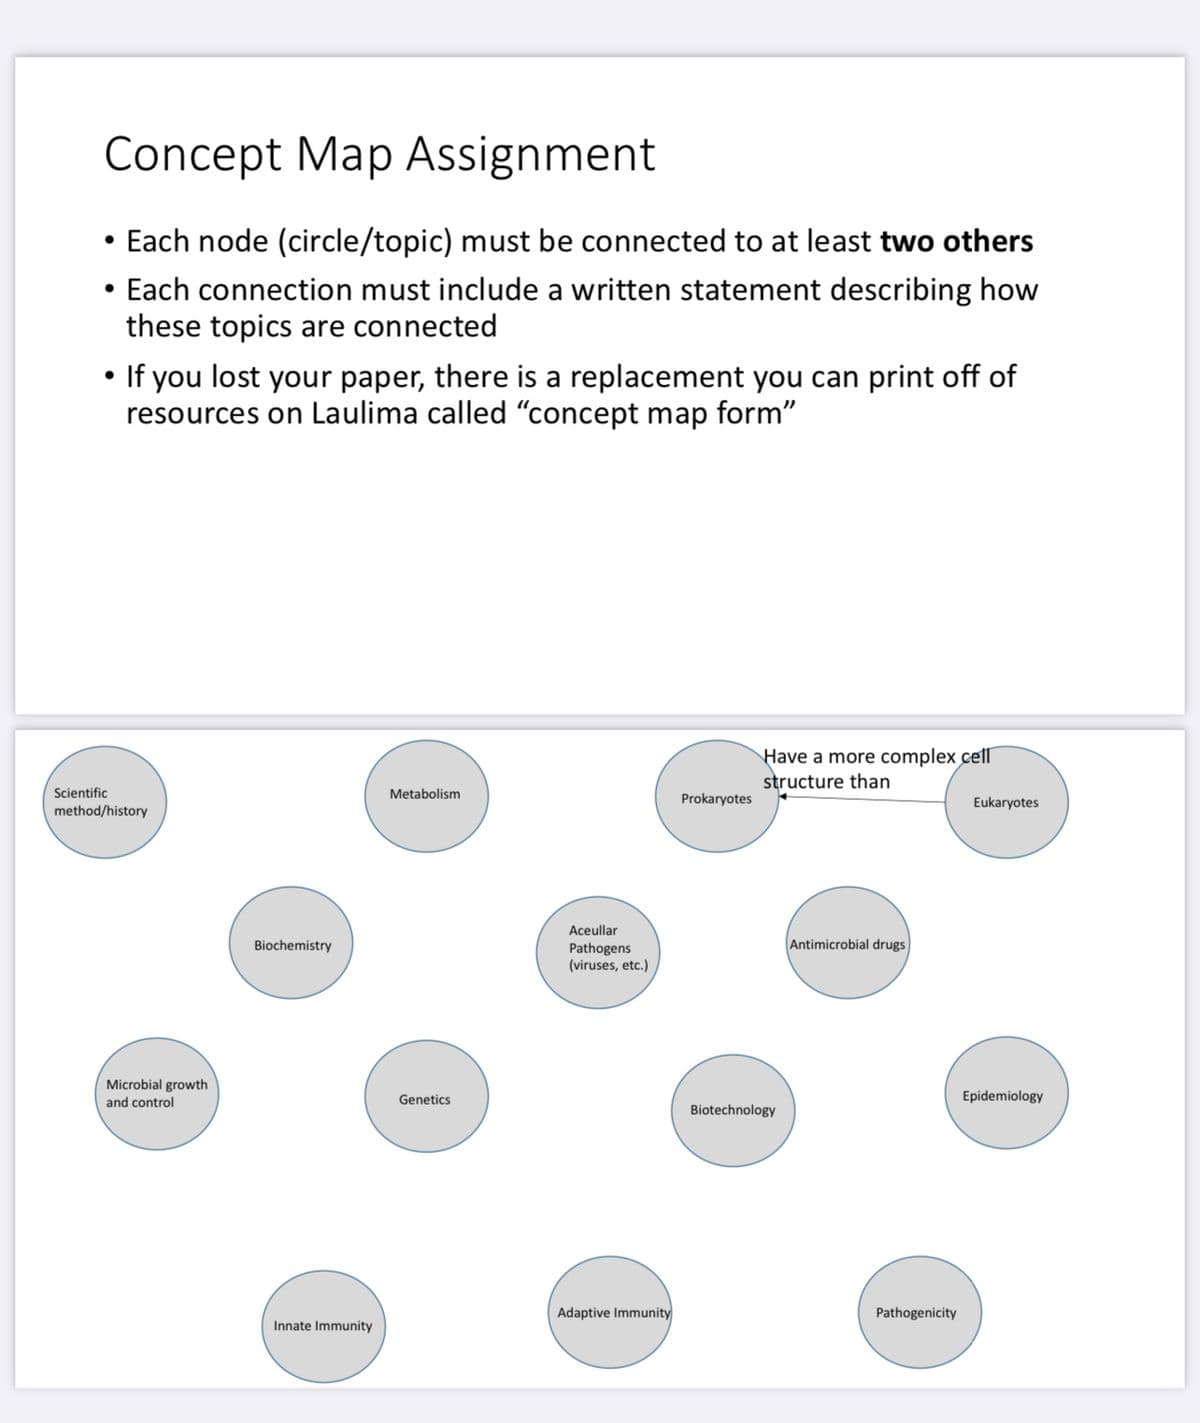 Concept Map Assignment
• Each node (circle/topic) must be connected to at least two others
• Each connection must include a written statement describing how
these topics are connected
If you lost your paper, there is a replacement you can print off of
resources on Laulima called "concept map form"
Have a more complex cell
structure than
Scientific
Metabolism
Prokaryotes
Eukaryotes
method/history
Aceullar
Biochemistry
Antimicrobial drugs
Pathogens
(viruses, etc.)
Microbial growth
and control
Genetics
Epidemiology
Biotechnology
Adaptive Immunity
Pathogenicity
Innate Immunity
